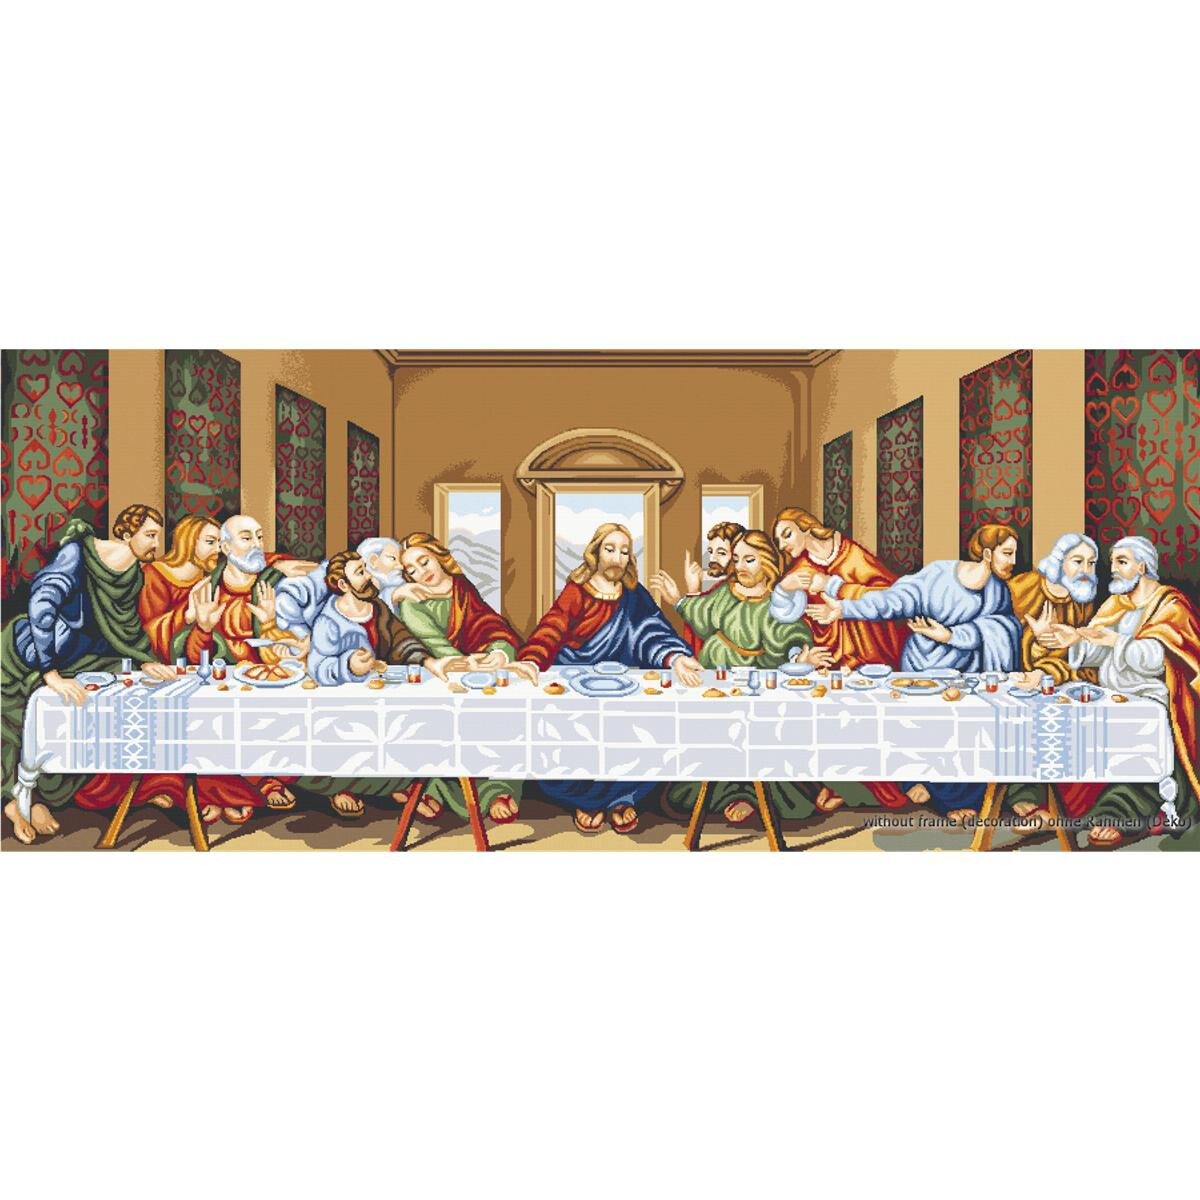 Luca-S counted Cross Stitch kit "The Last...